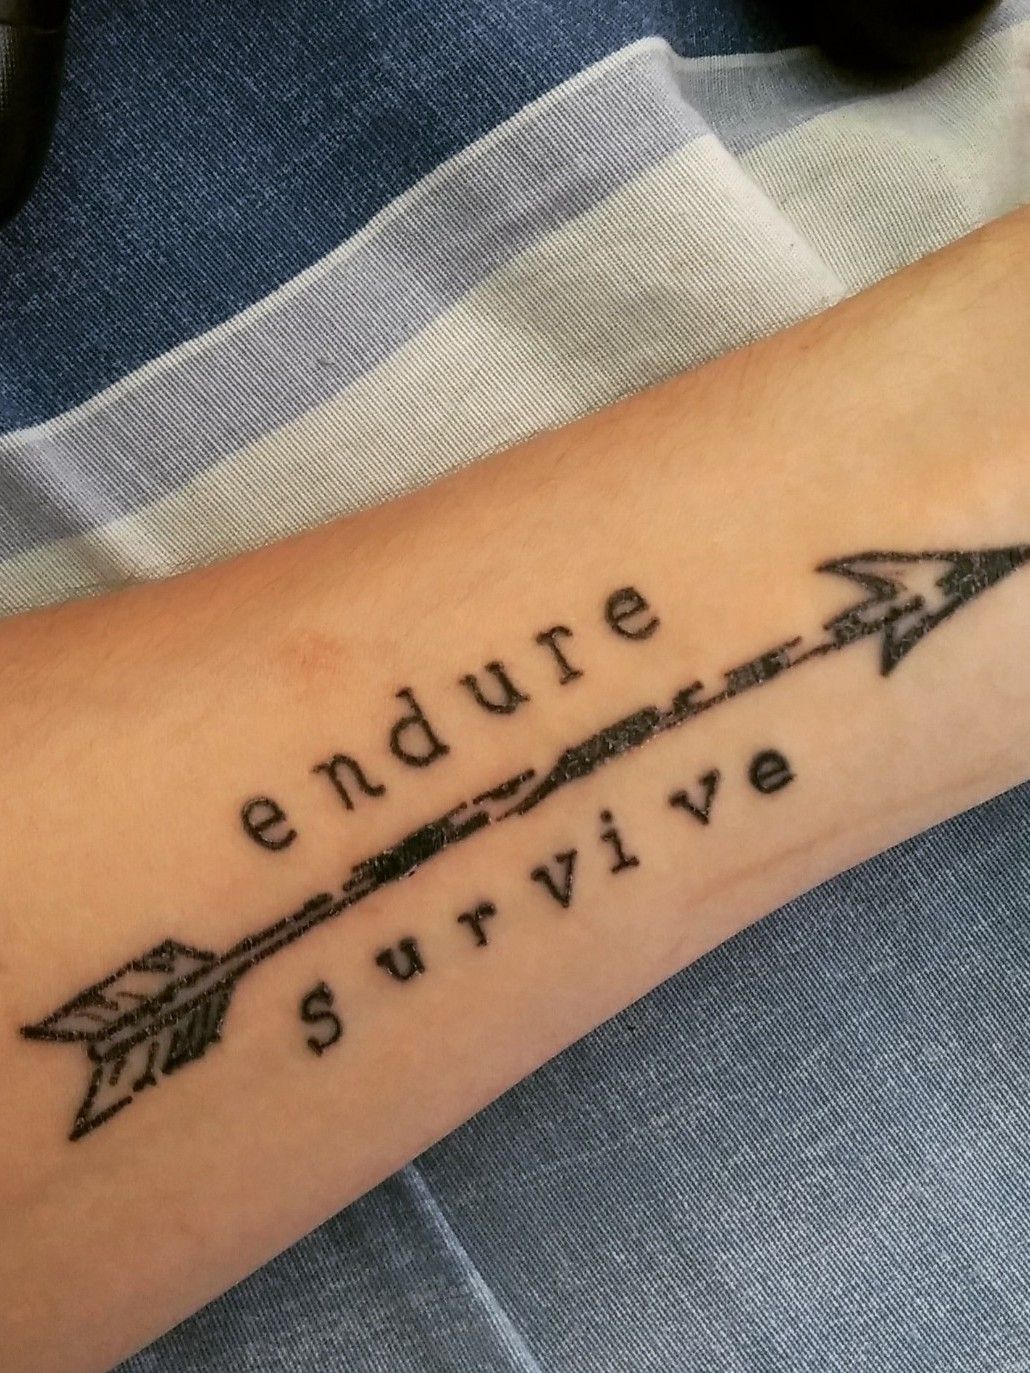 Endure and survive tattoo by Loz McLean  Tattoogridnet